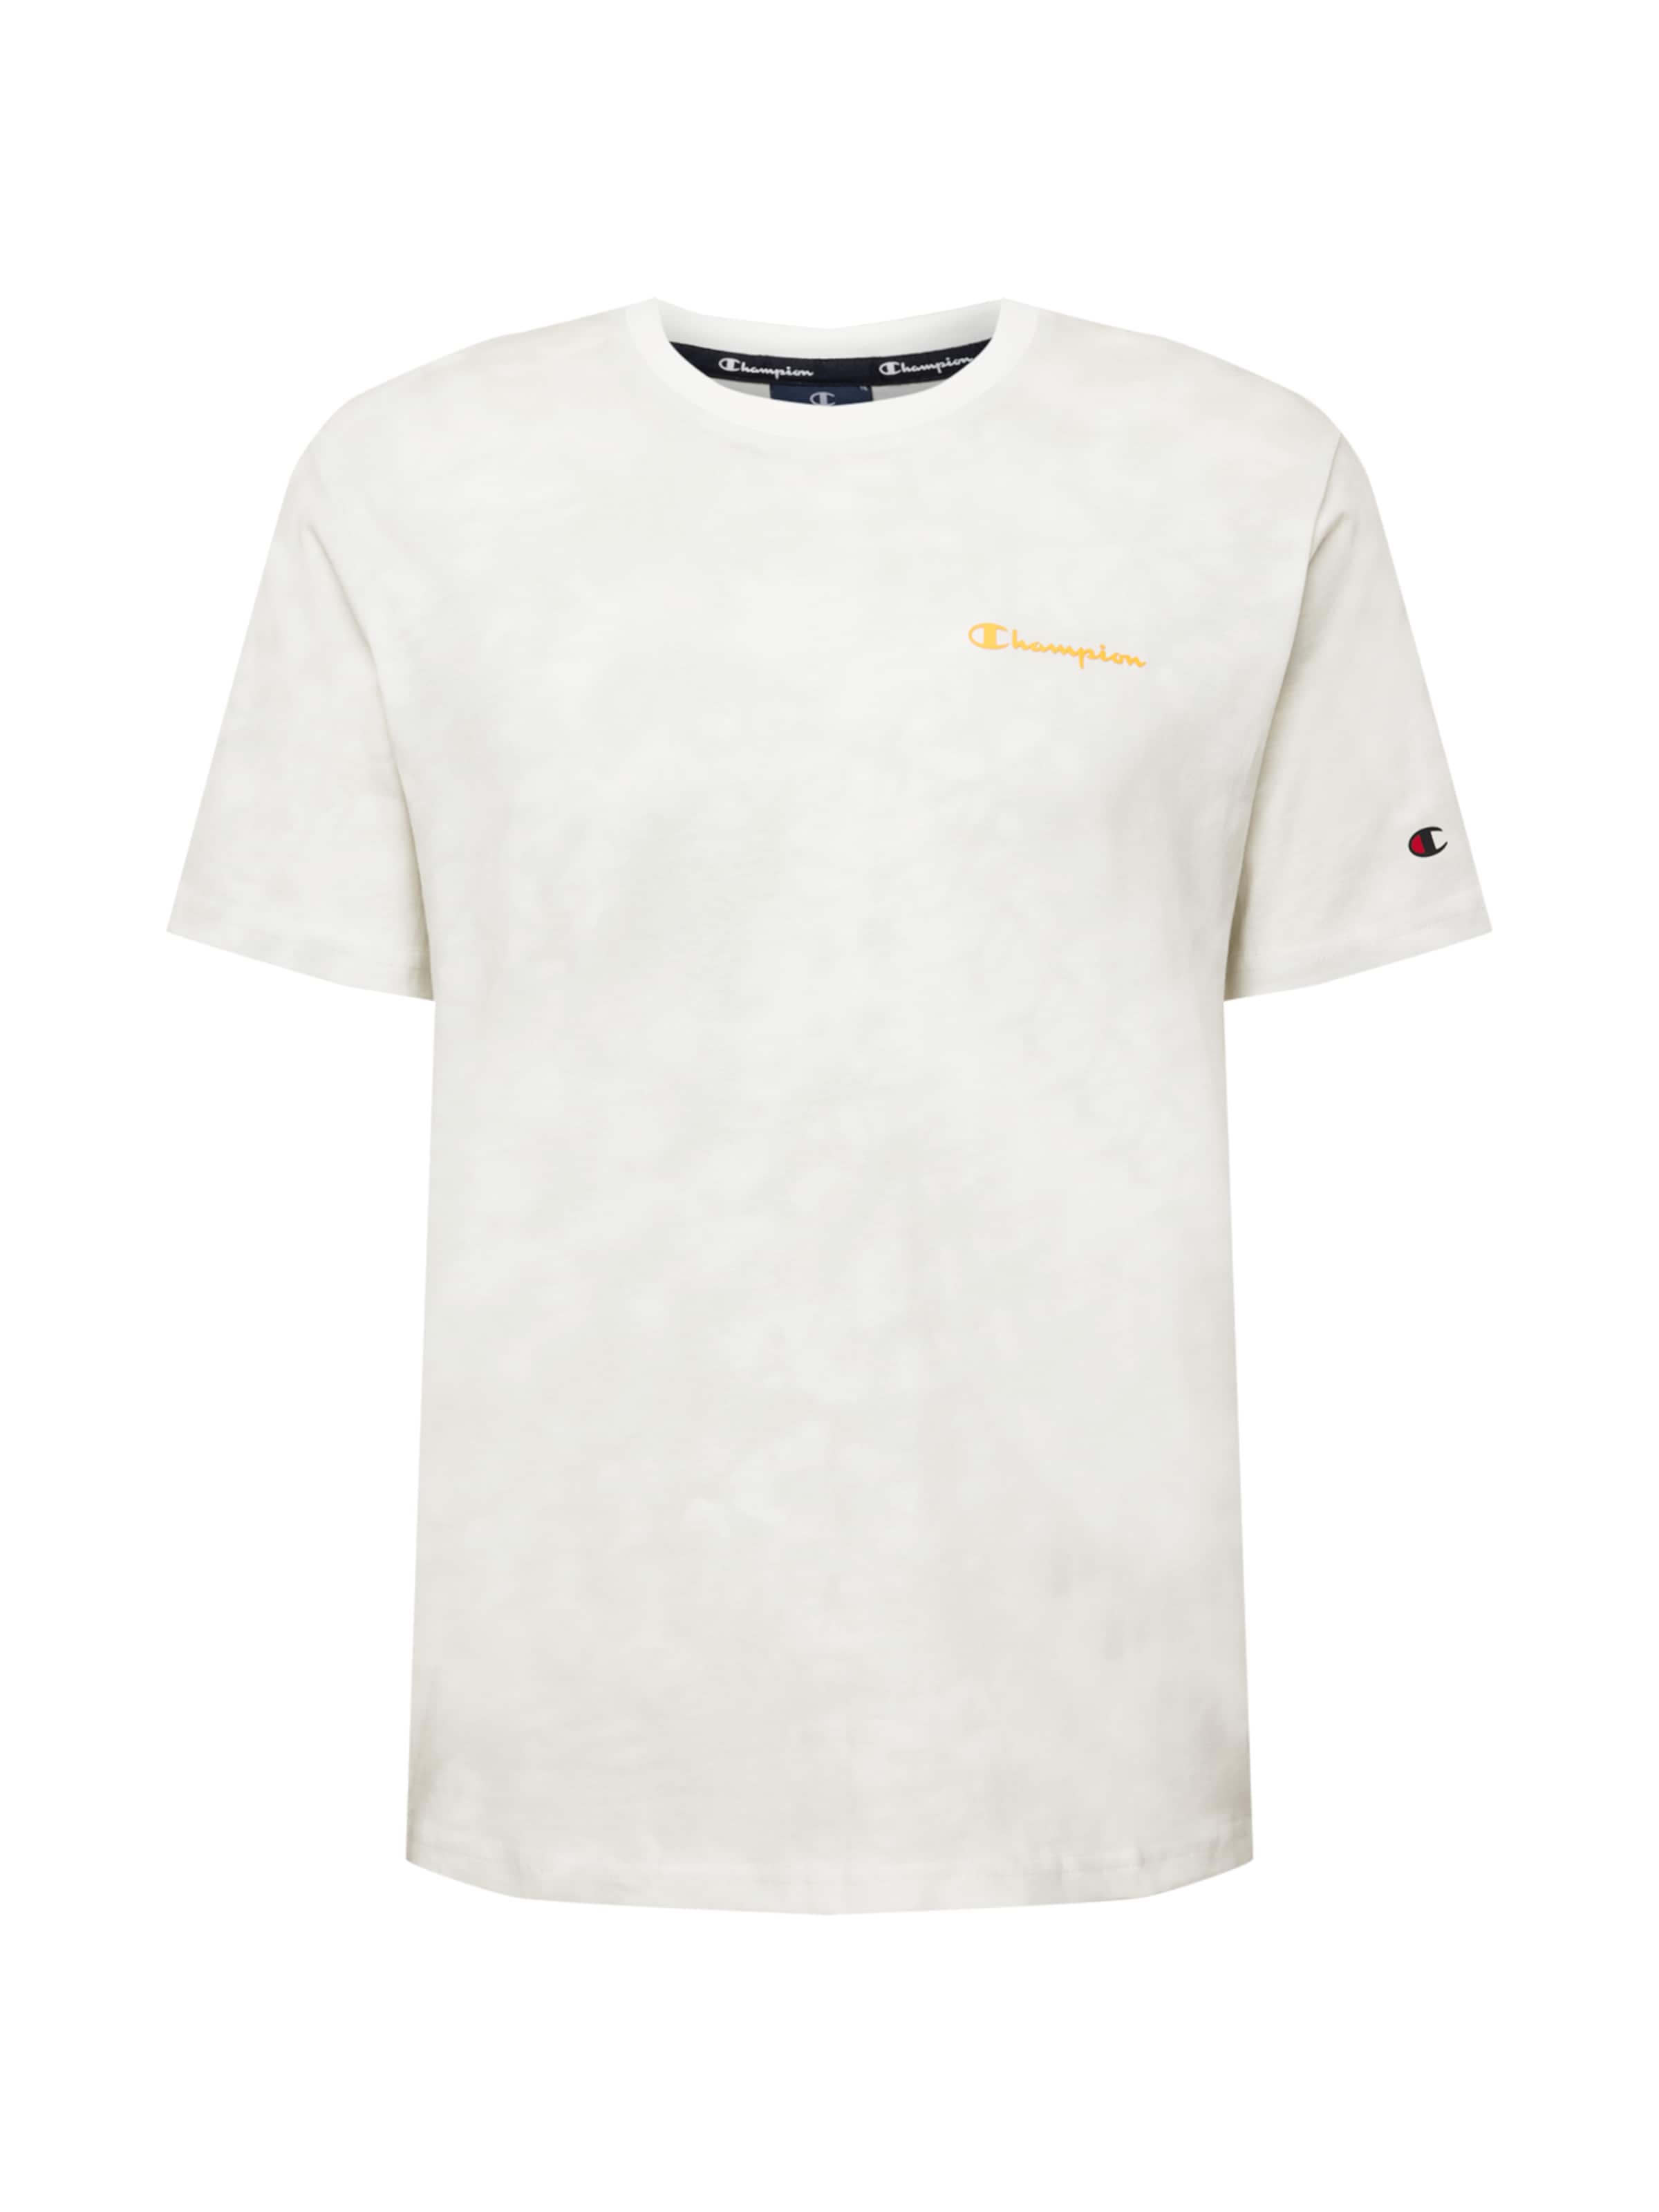 Männer Shirts Champion Authentic Athletic Apparel T-Shirt in Weiß - WL83335